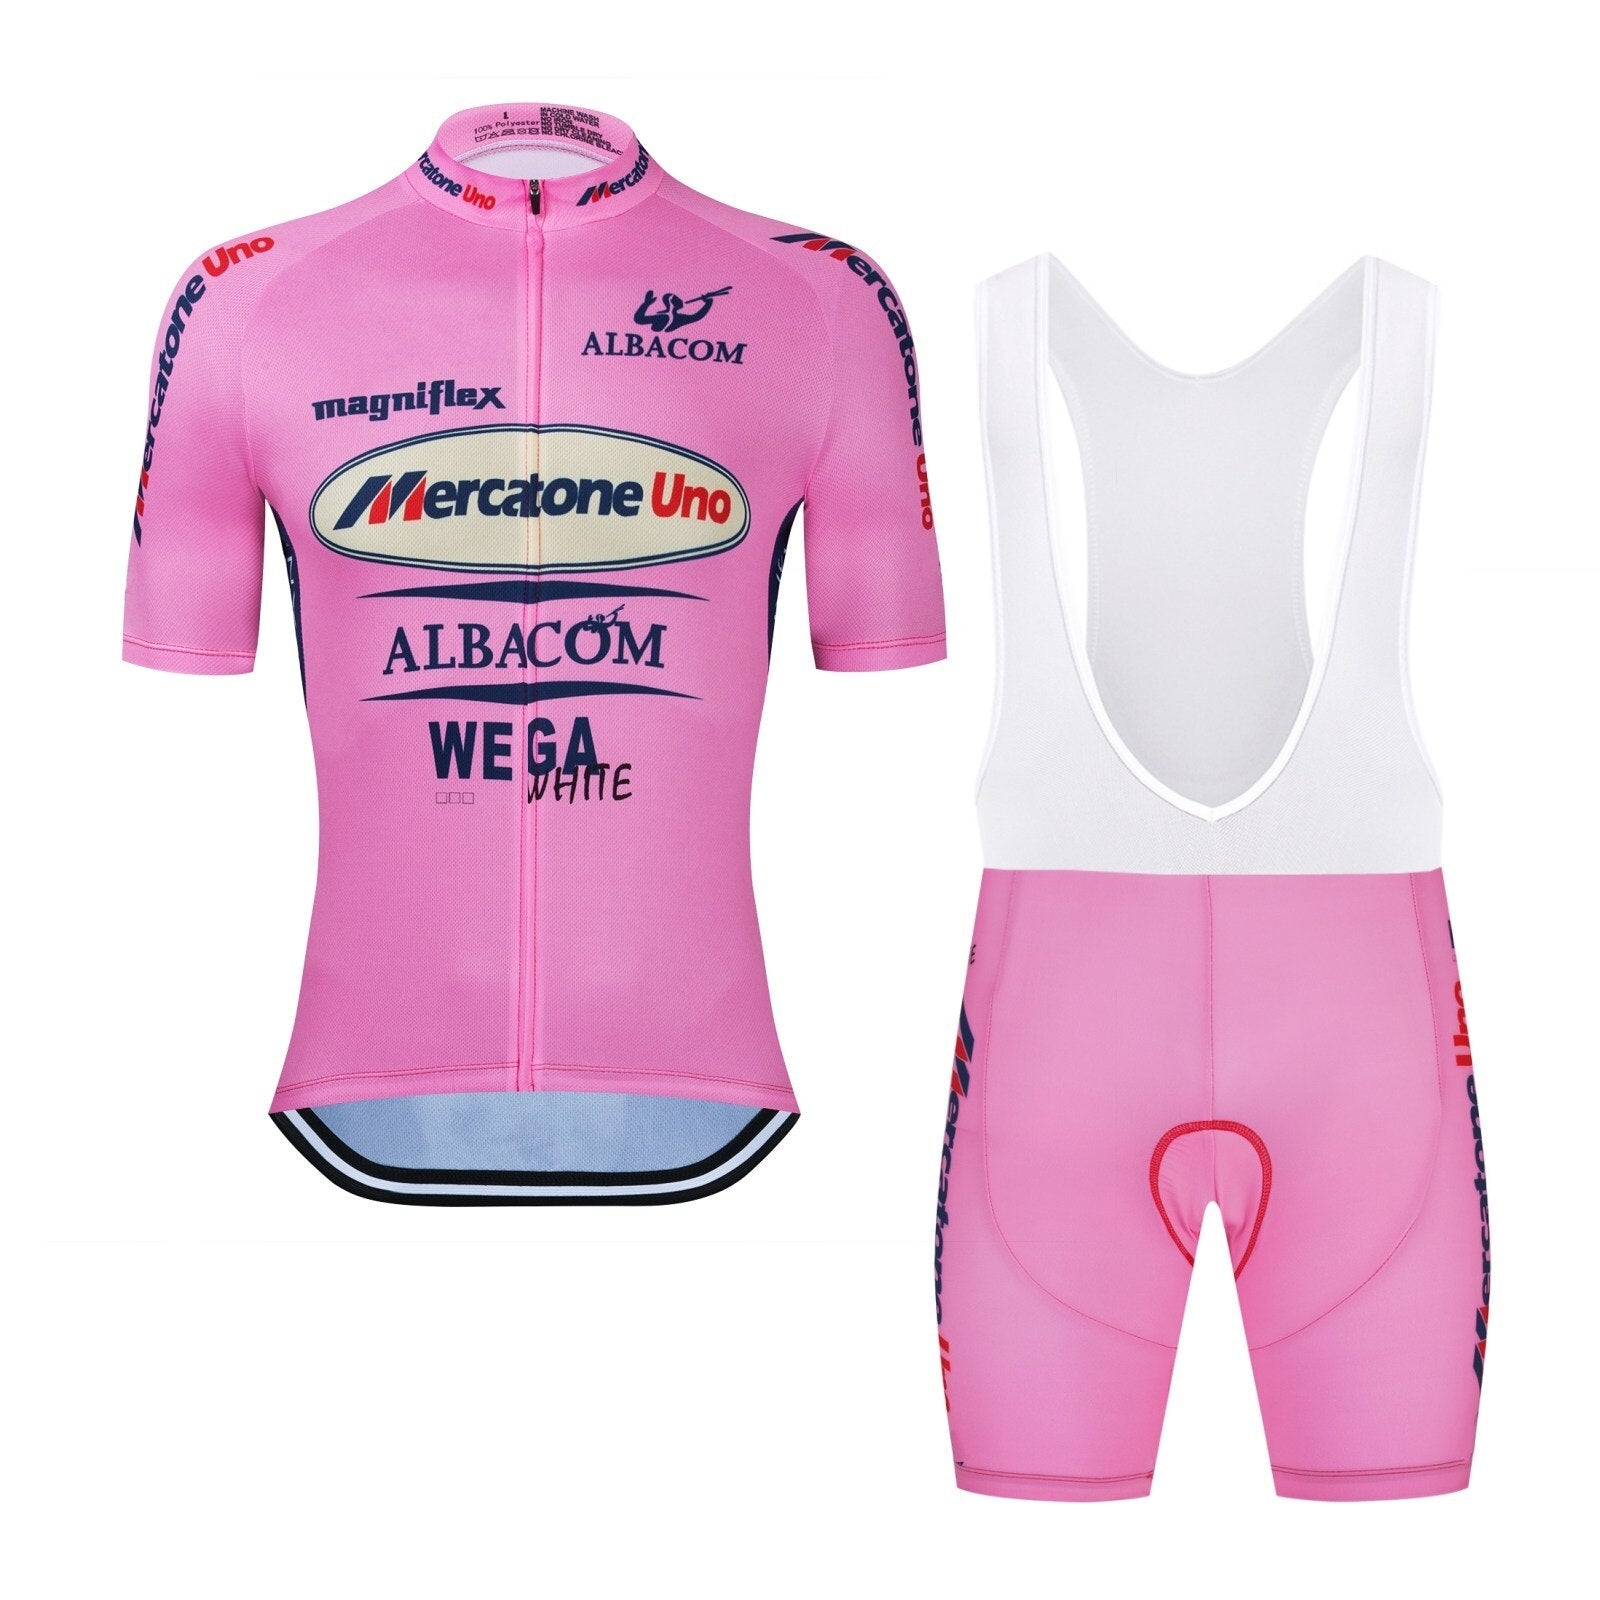 Marco Pink Retro Cycling Jersey Short sleeved suit